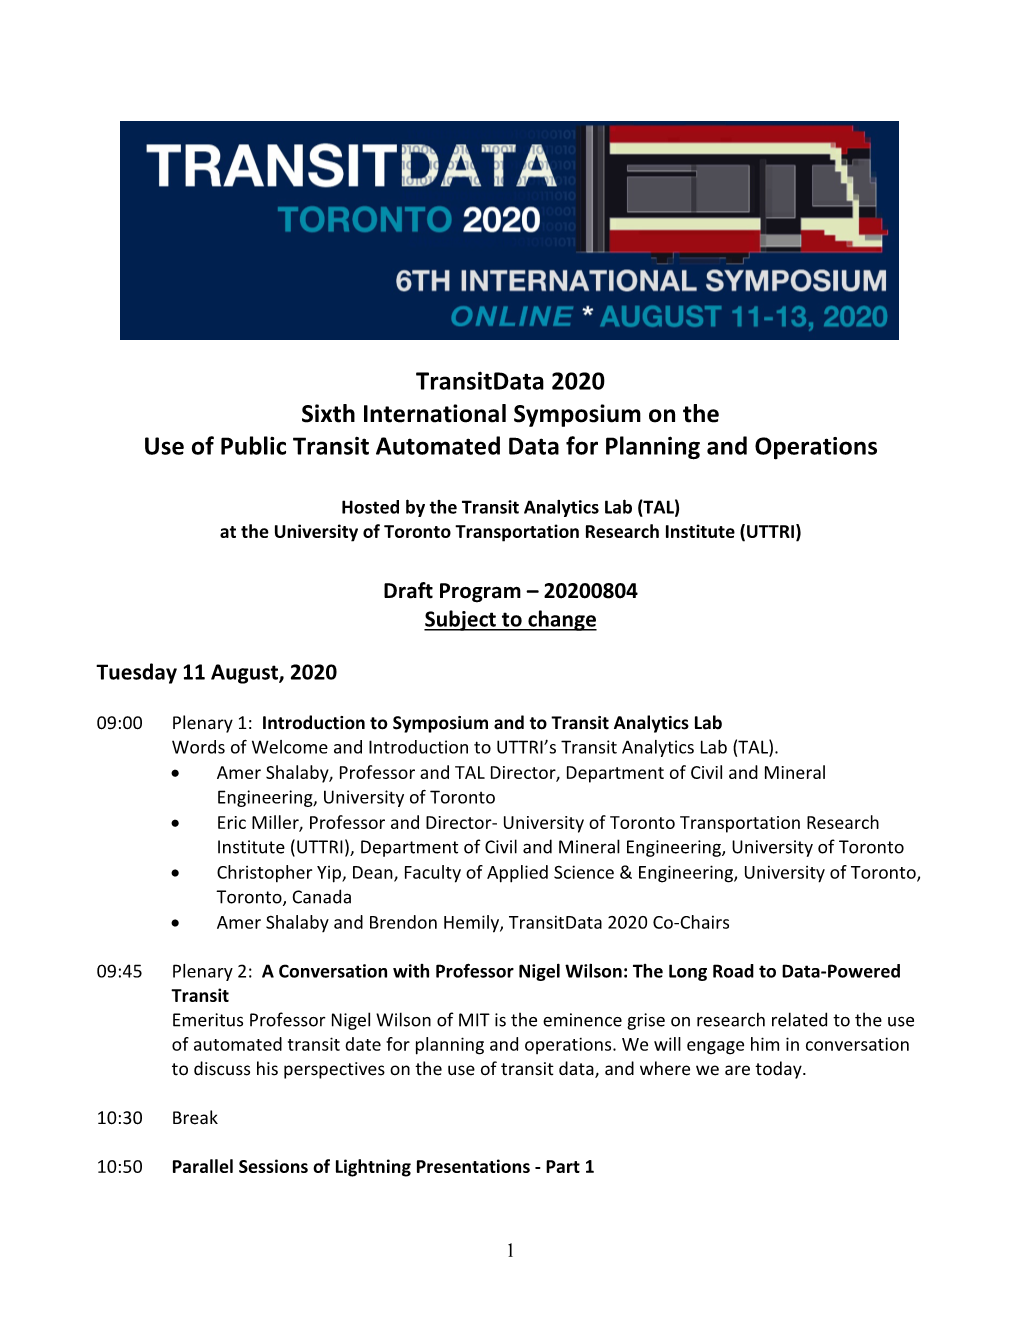 Transitdata 2020 Sixth International Symposium on the Use of Public Transit Automated Data for Planning and Operations